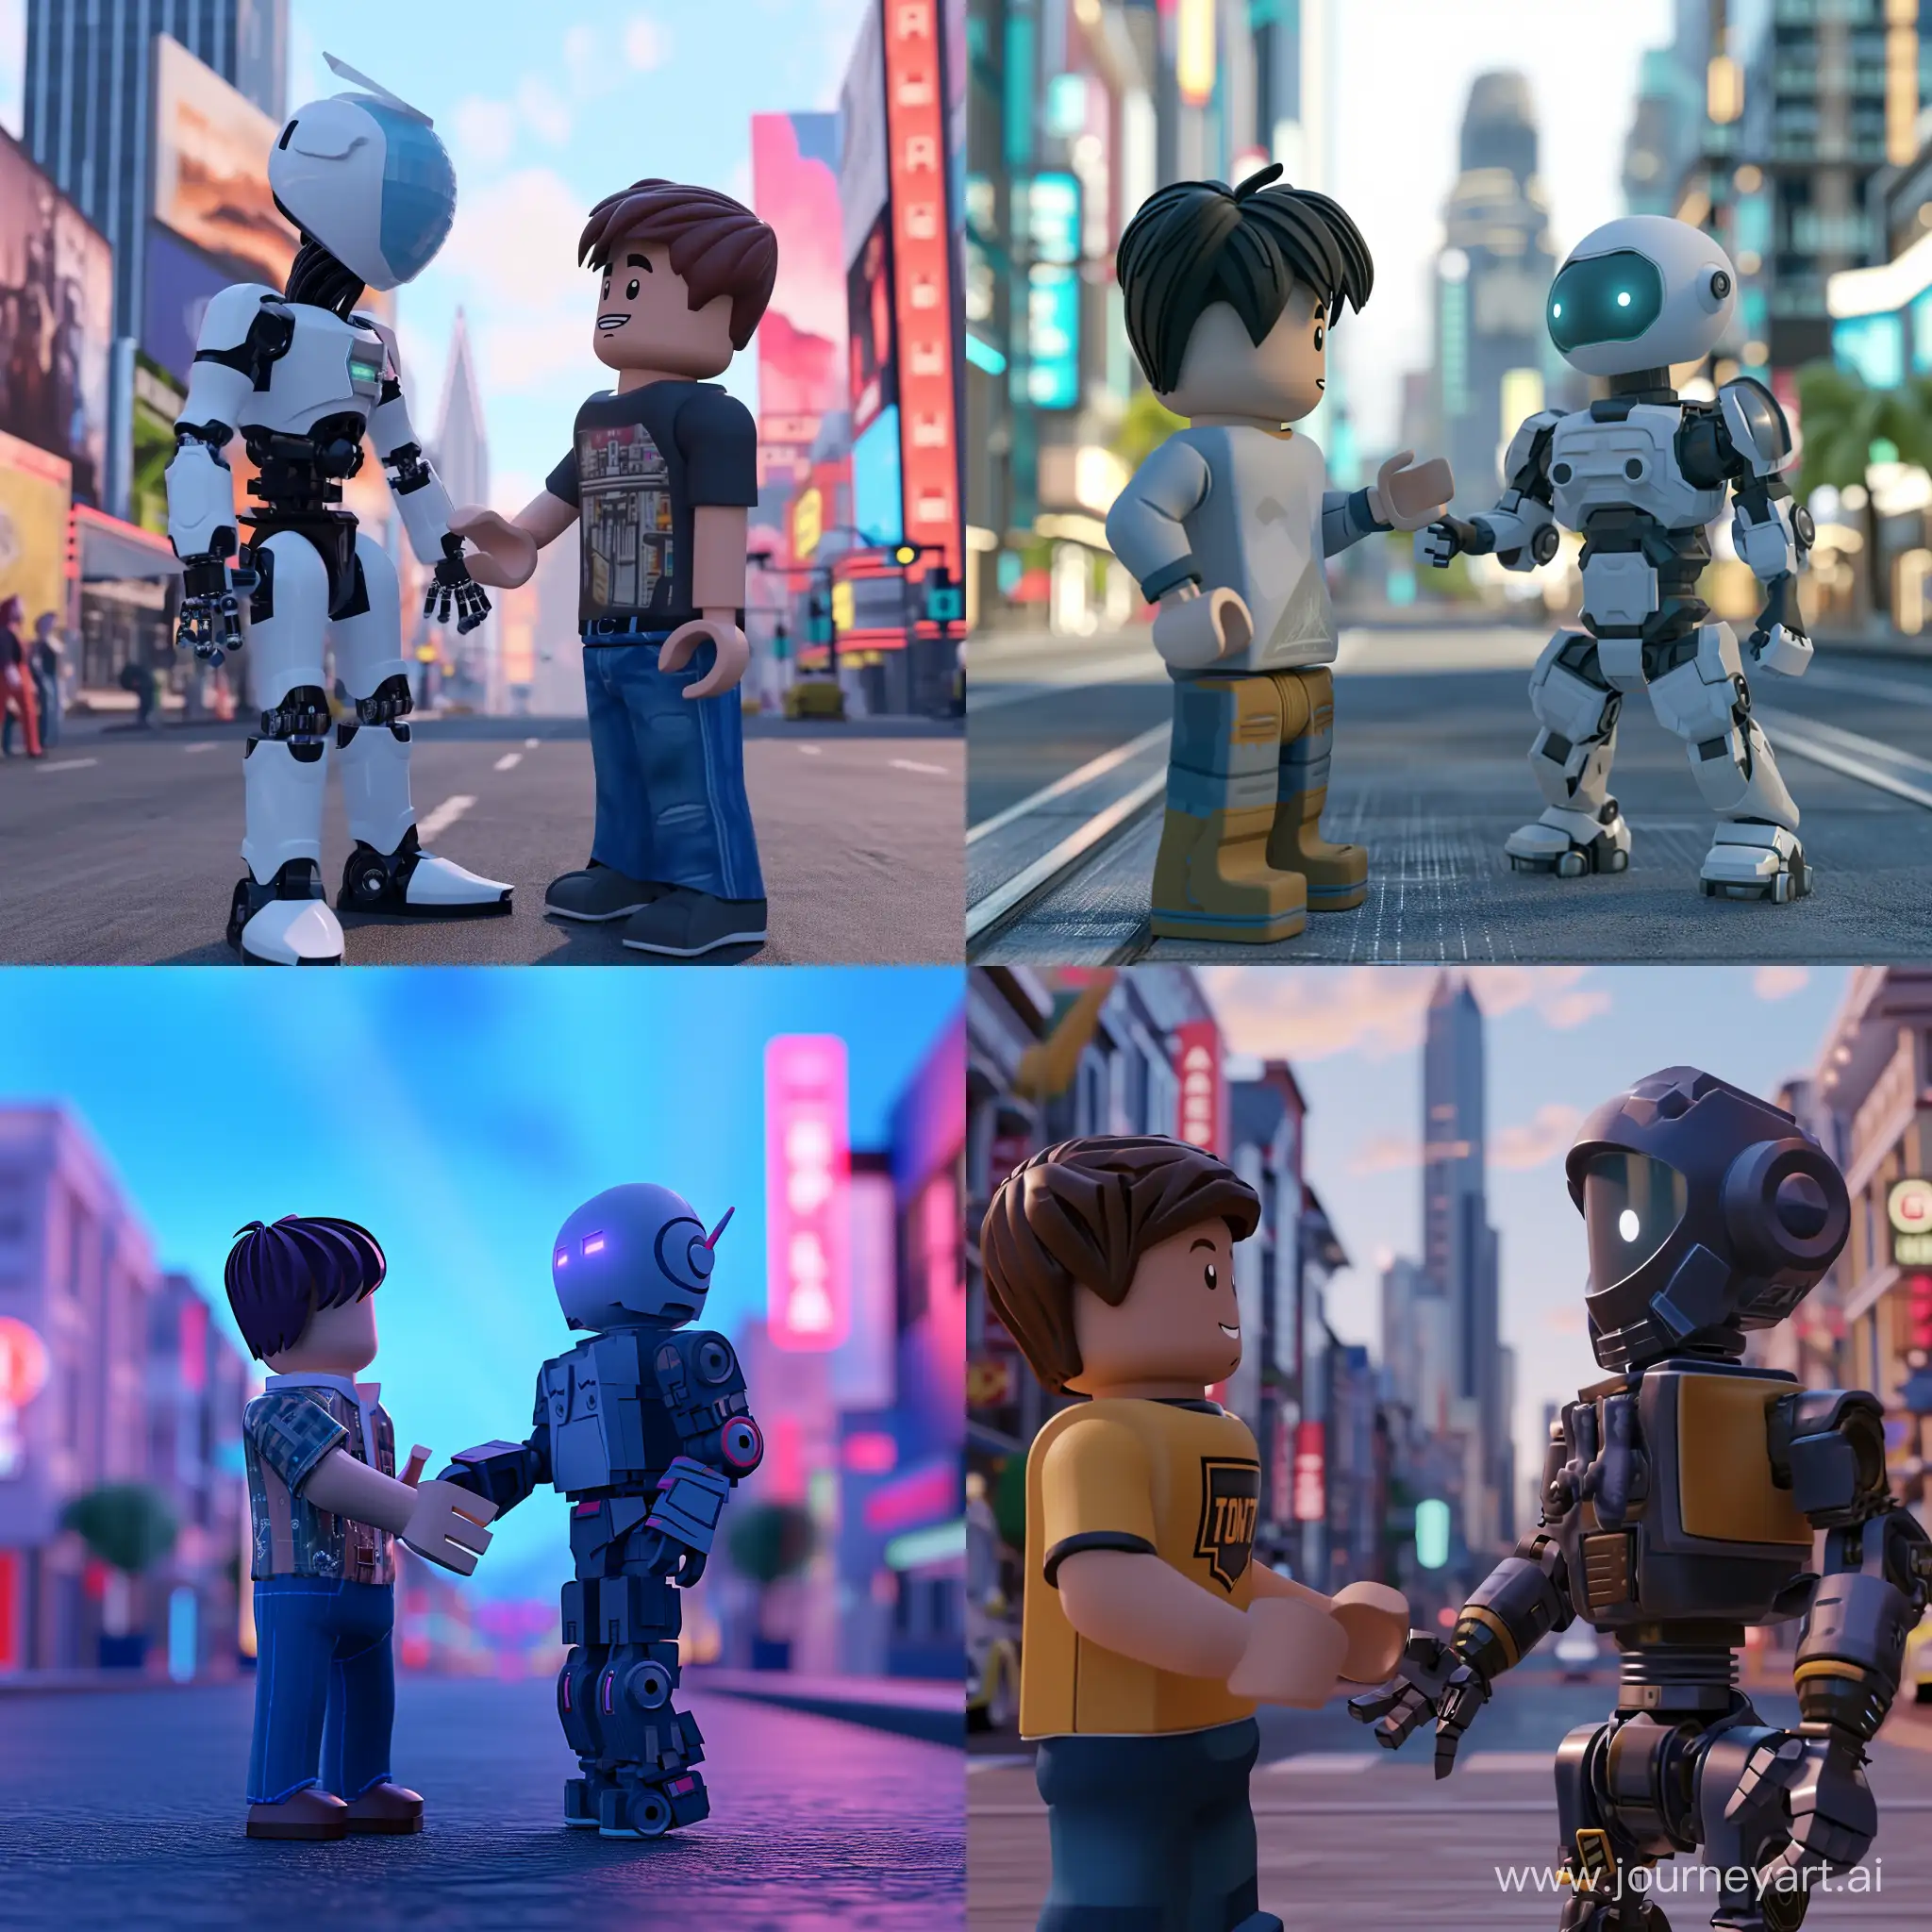 Roblox-Boy-Chatting-with-AI-Robot-in-City